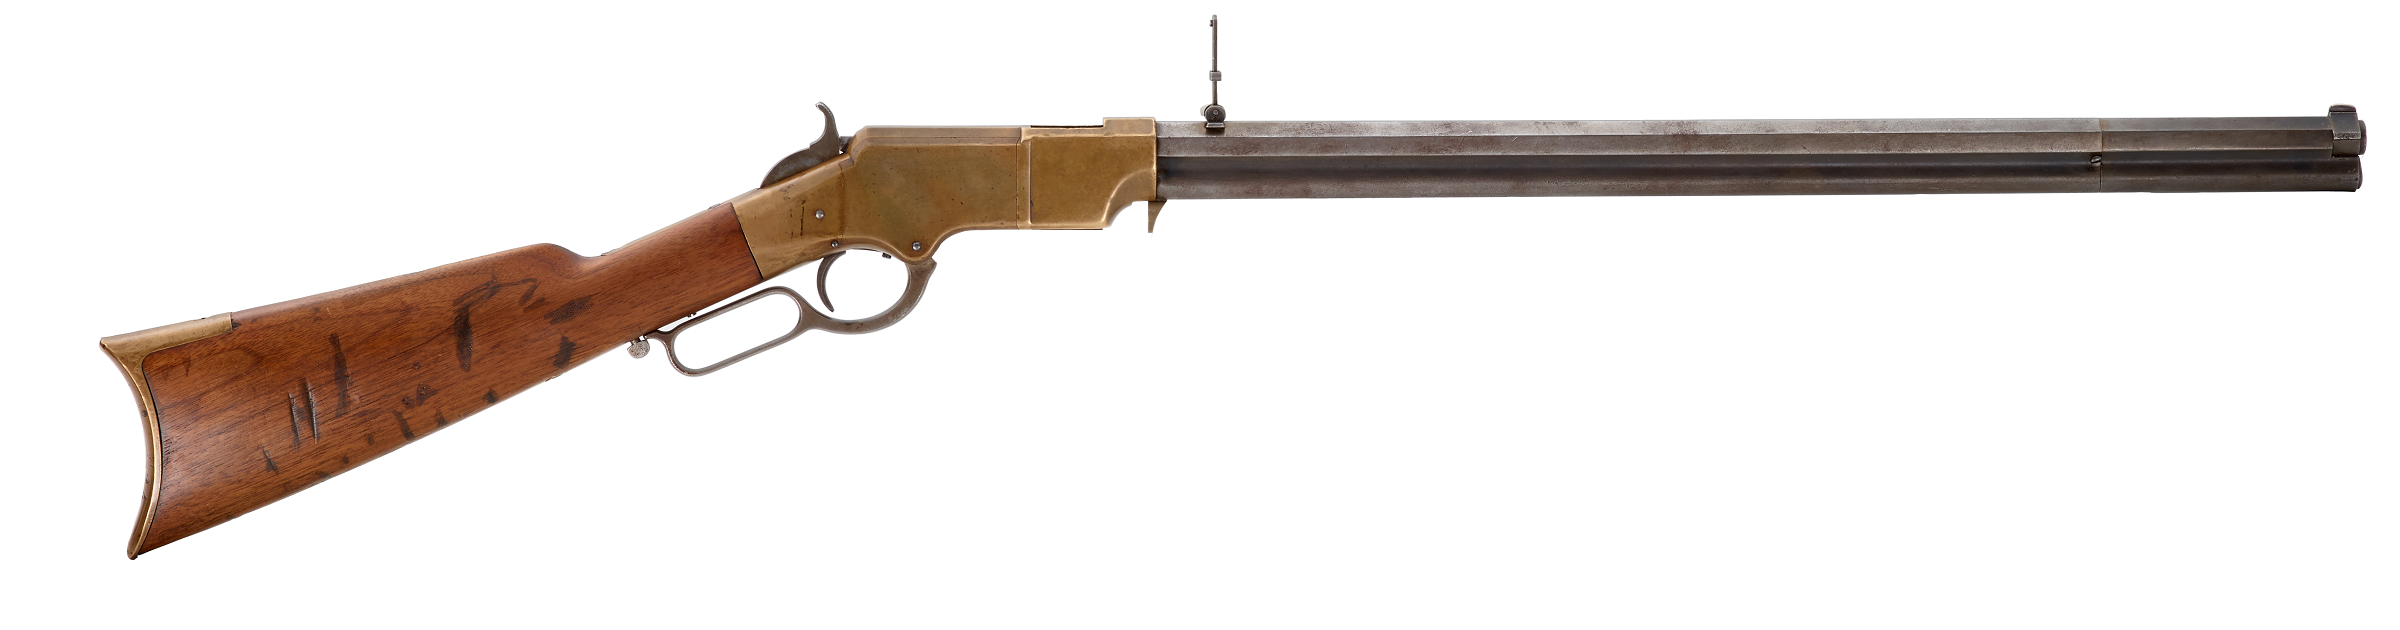 The original Henry rifle was chambered in .44 Flat.